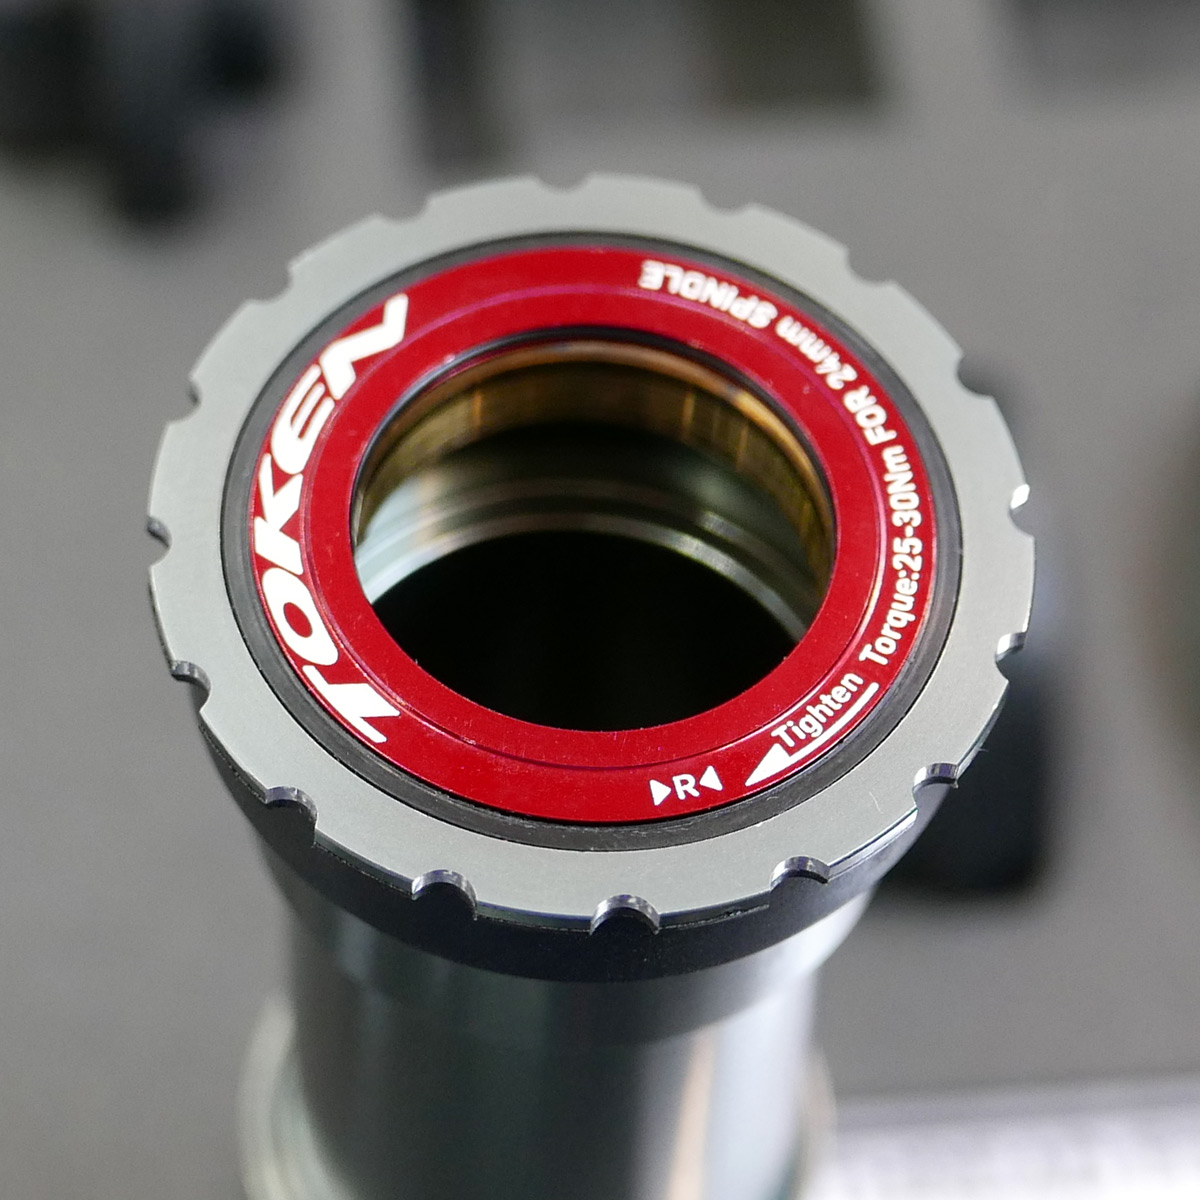 Press-fit Bottom Brackets Are BETTER Than Threaded 